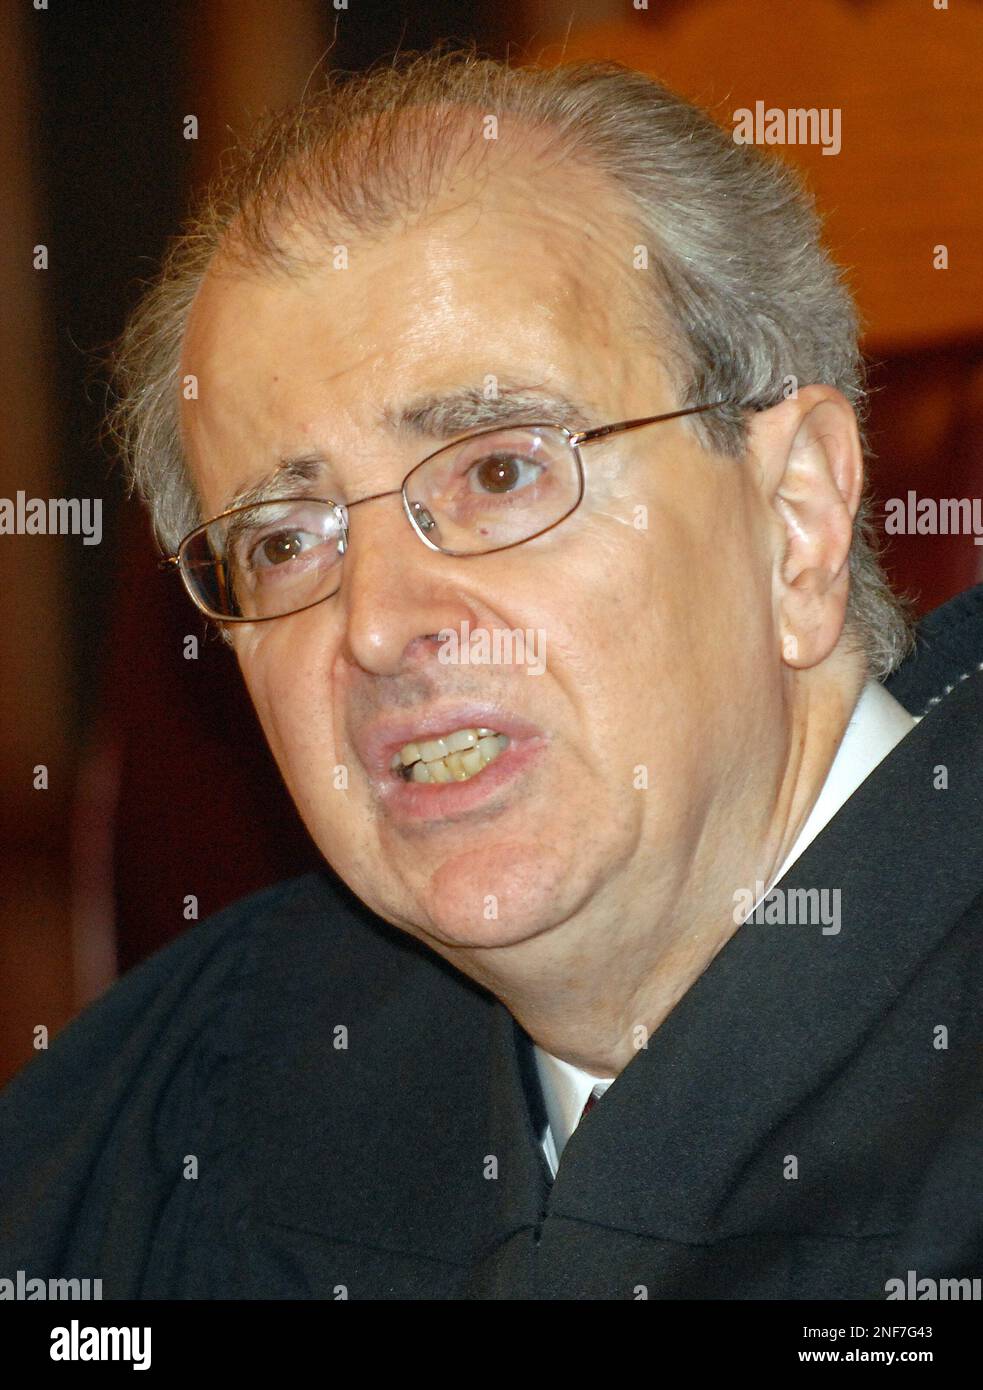 Judge Jonathan Lippman as the state's new Chief Judge during a swearing-in  ceremony at the New York State Court of Appeals in Albany, N.Y., Wednesday,  Feb. 25, 2009 (AP Photo/Hans Pennink Stock